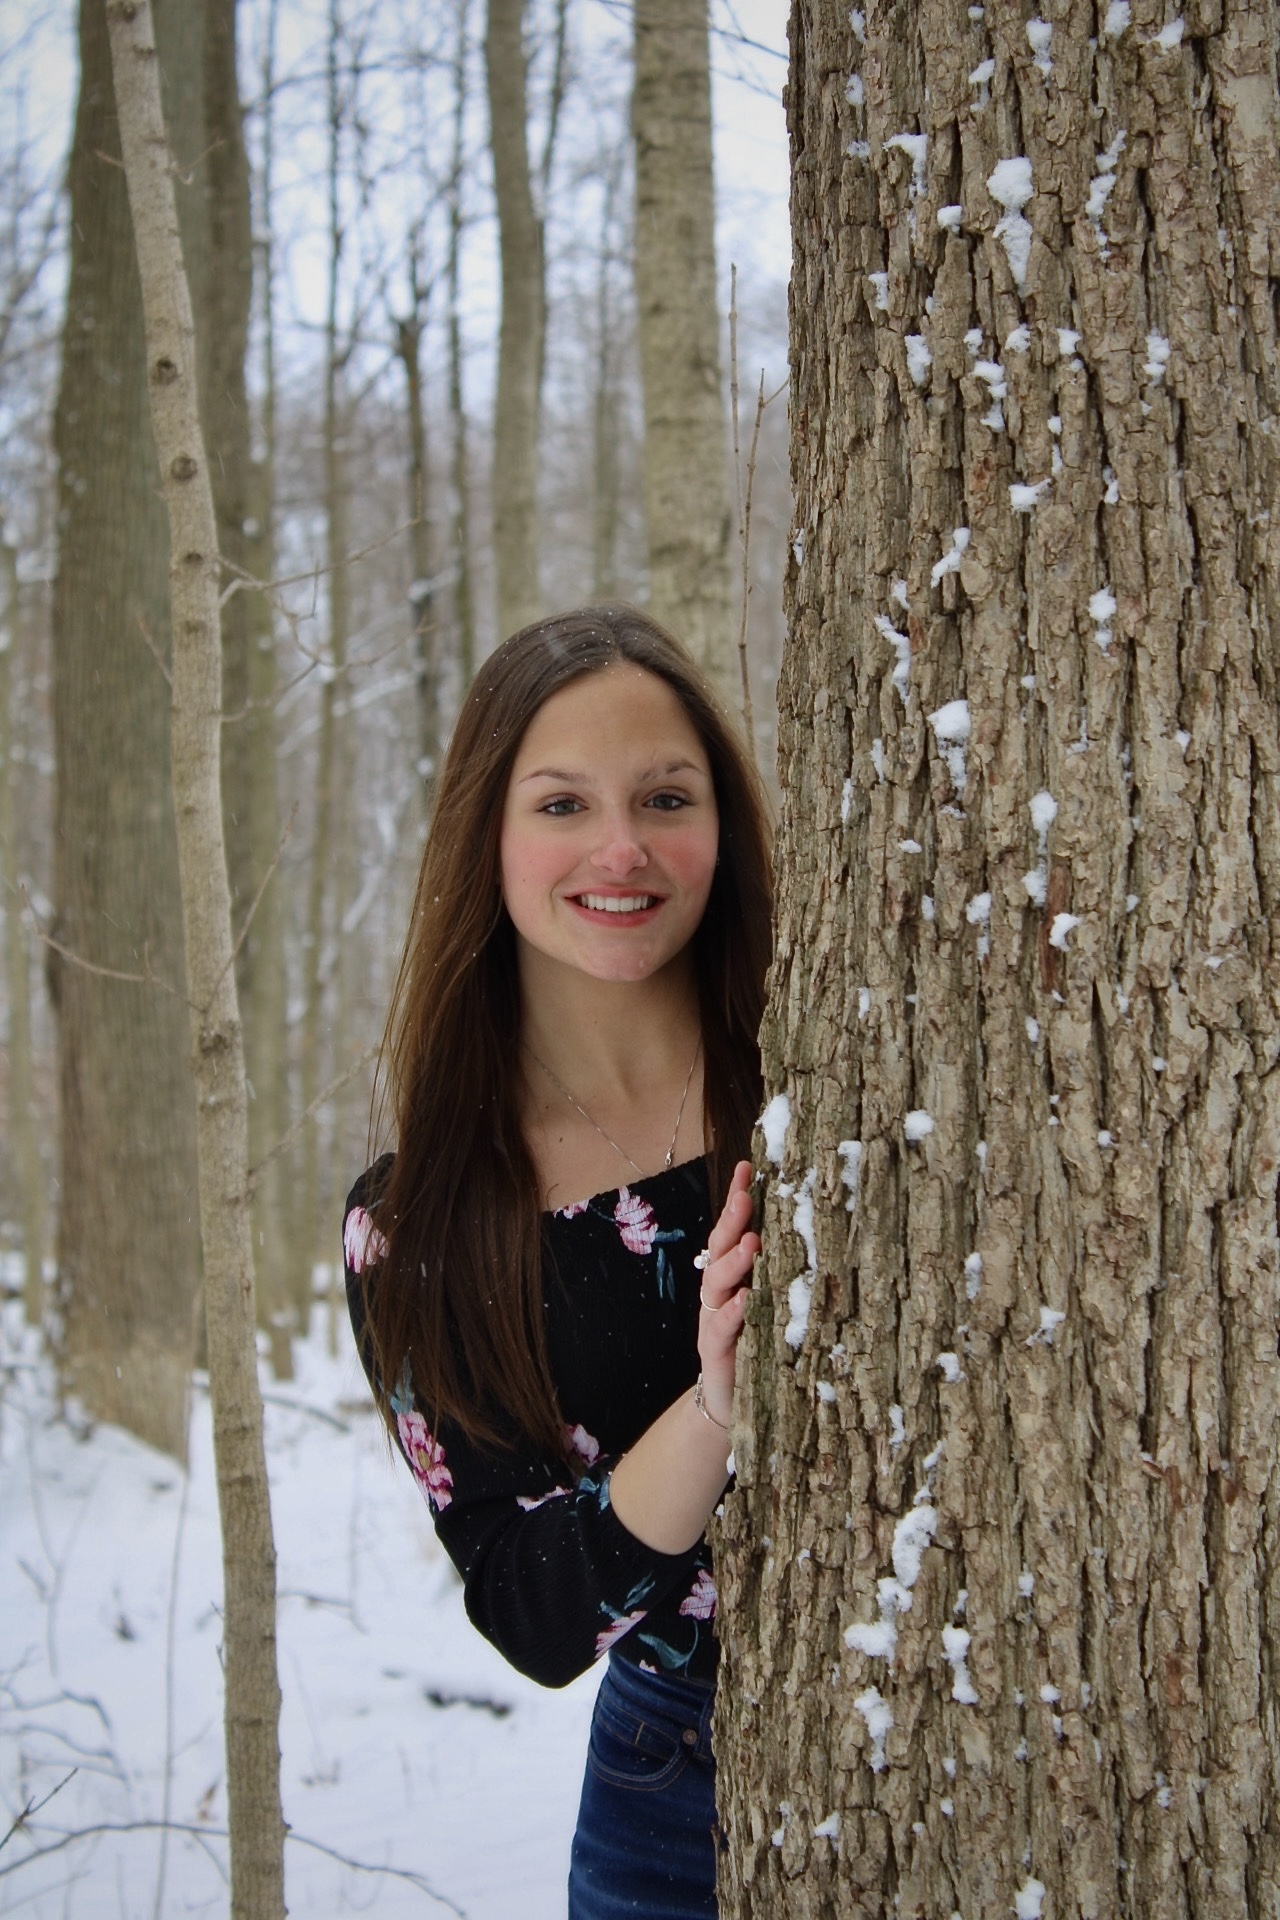 A girl leaning against a snow-covered tree, looking peaceful and serene in the winter landscape.